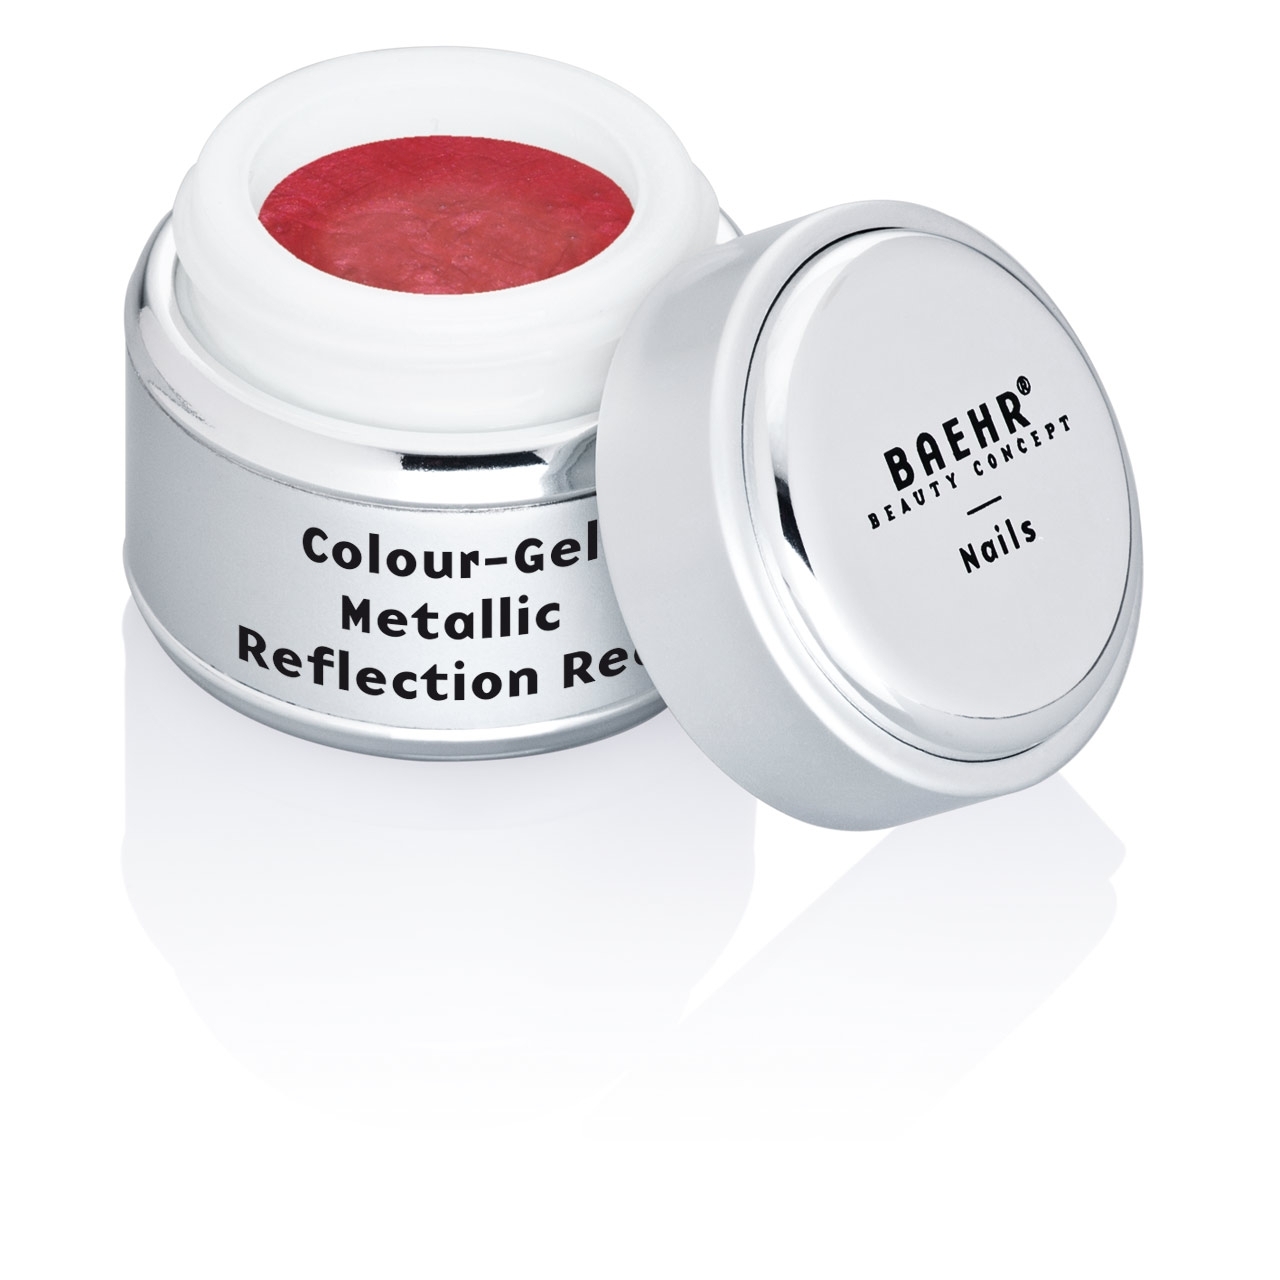 BAEHR BEAUTY CONCEPT - NAILS Colour-Gel Metallic Reflection Red 5 ml